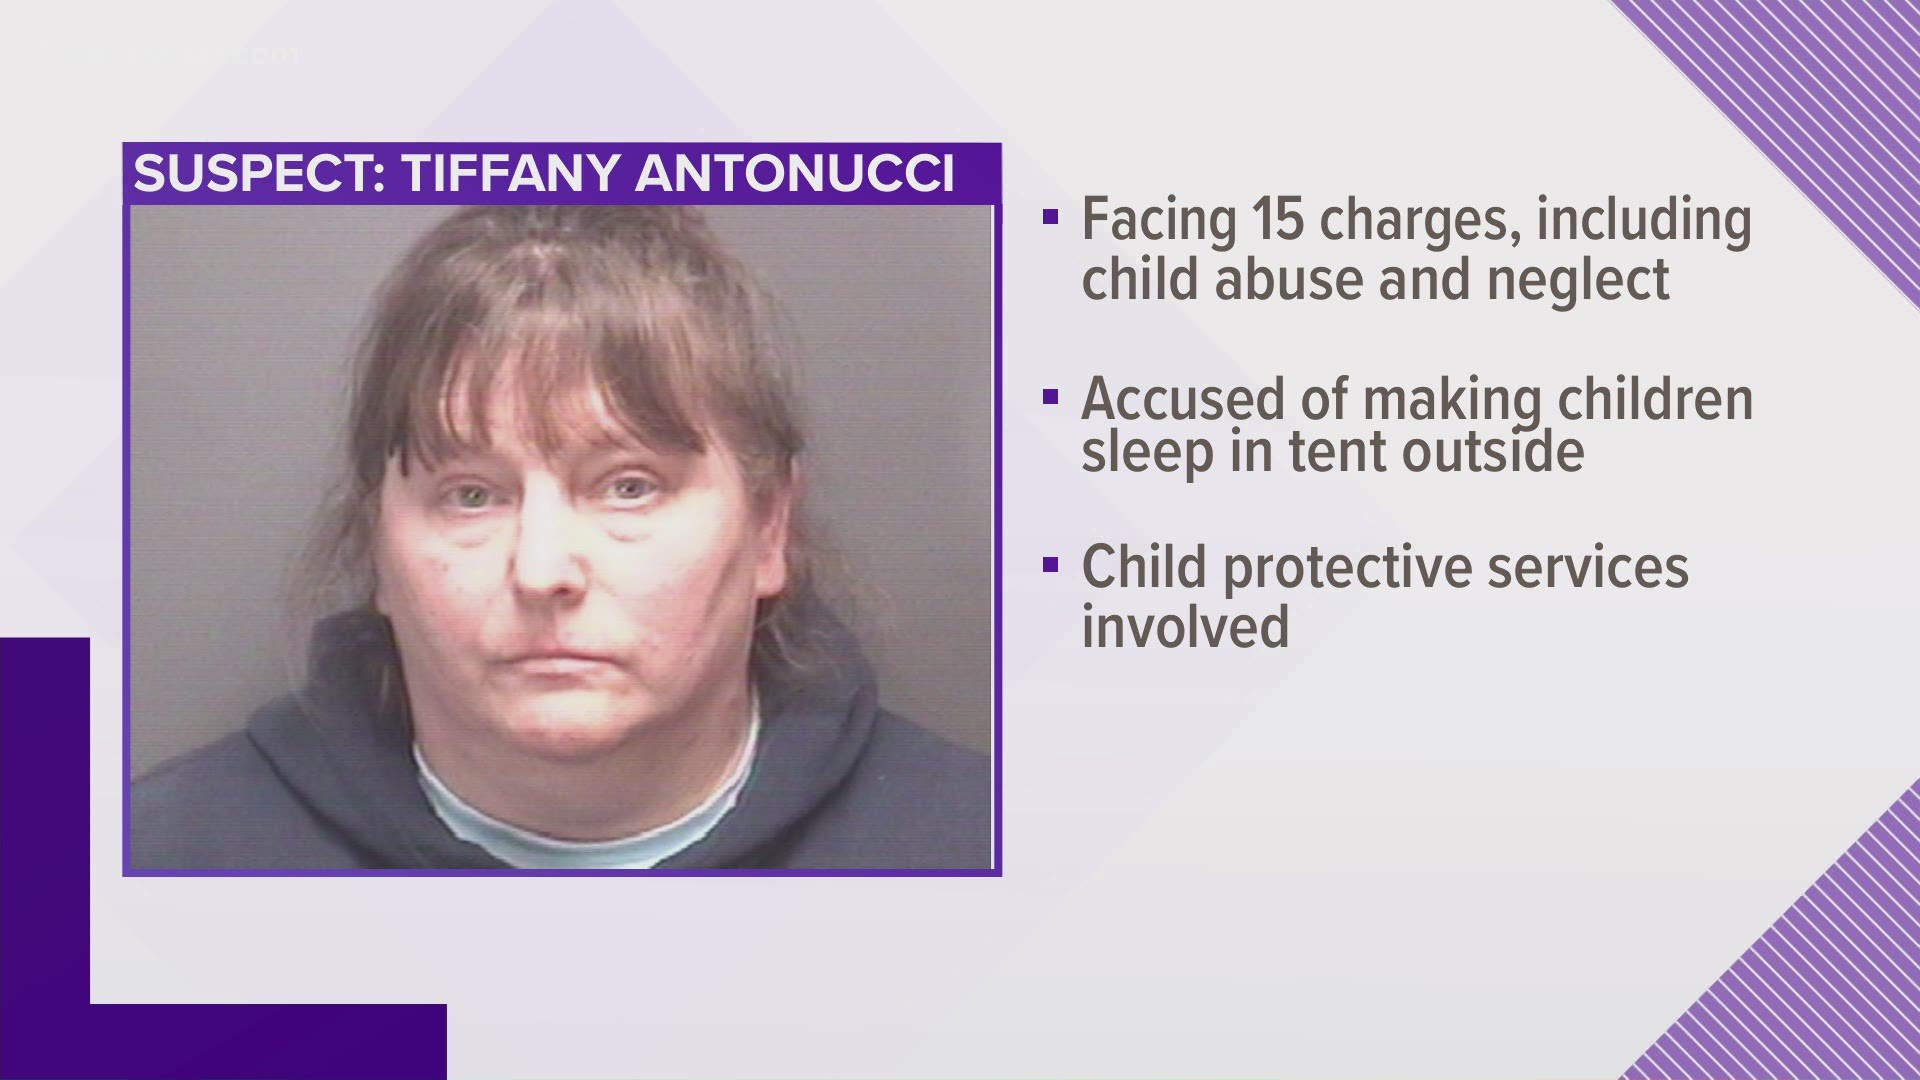 Tiffany Antonucci was arrested after police say she forced two boys to sleep outdoors in a tent regardless of the weather as a punishment.